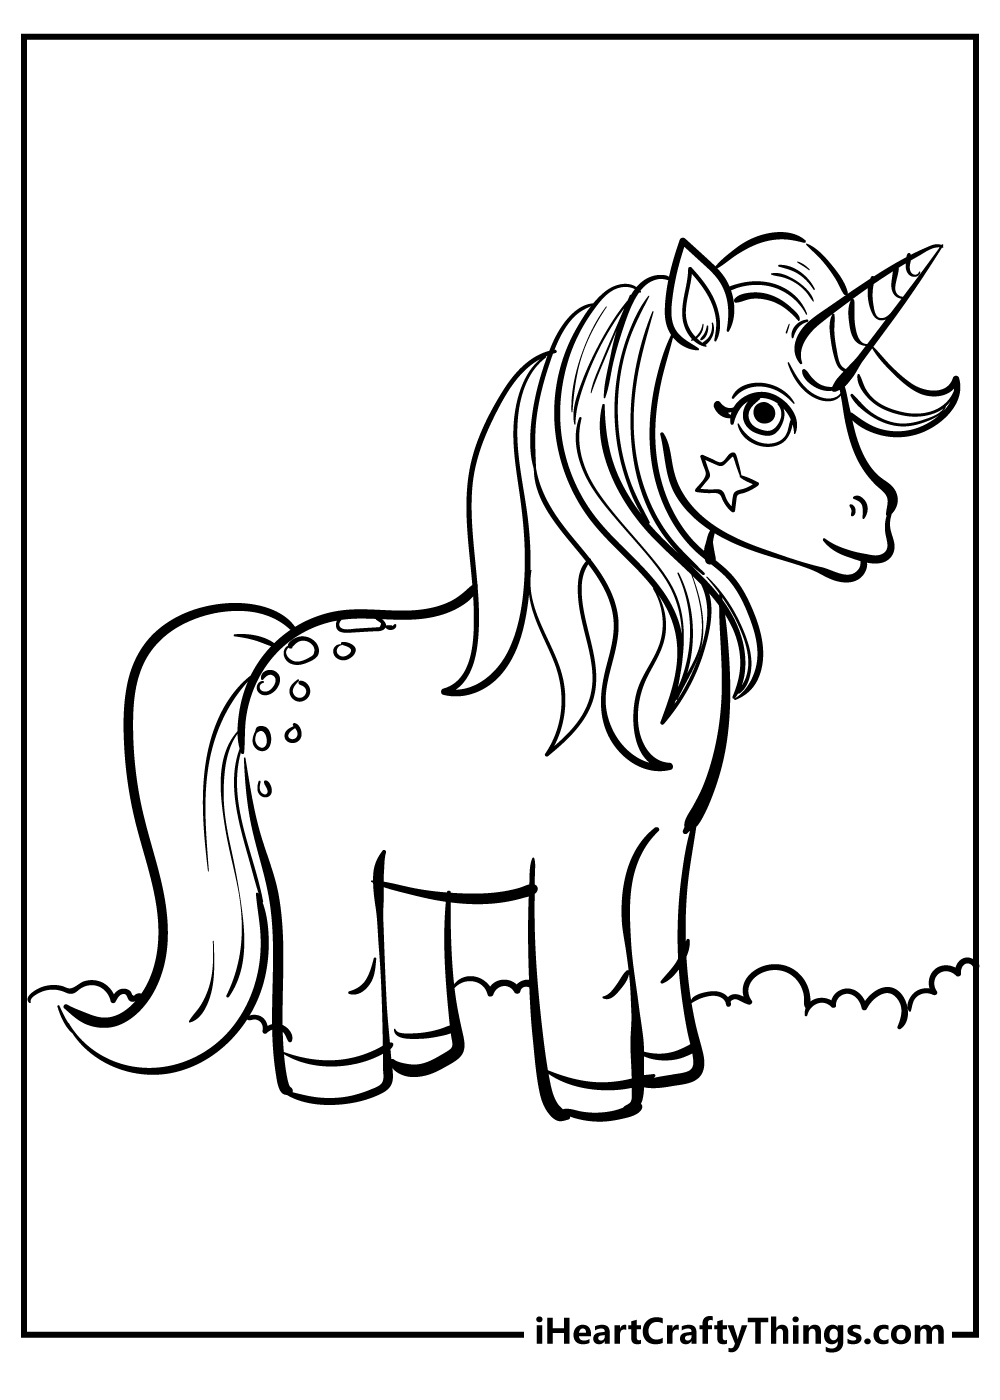 Unicorn coloring pages free printables